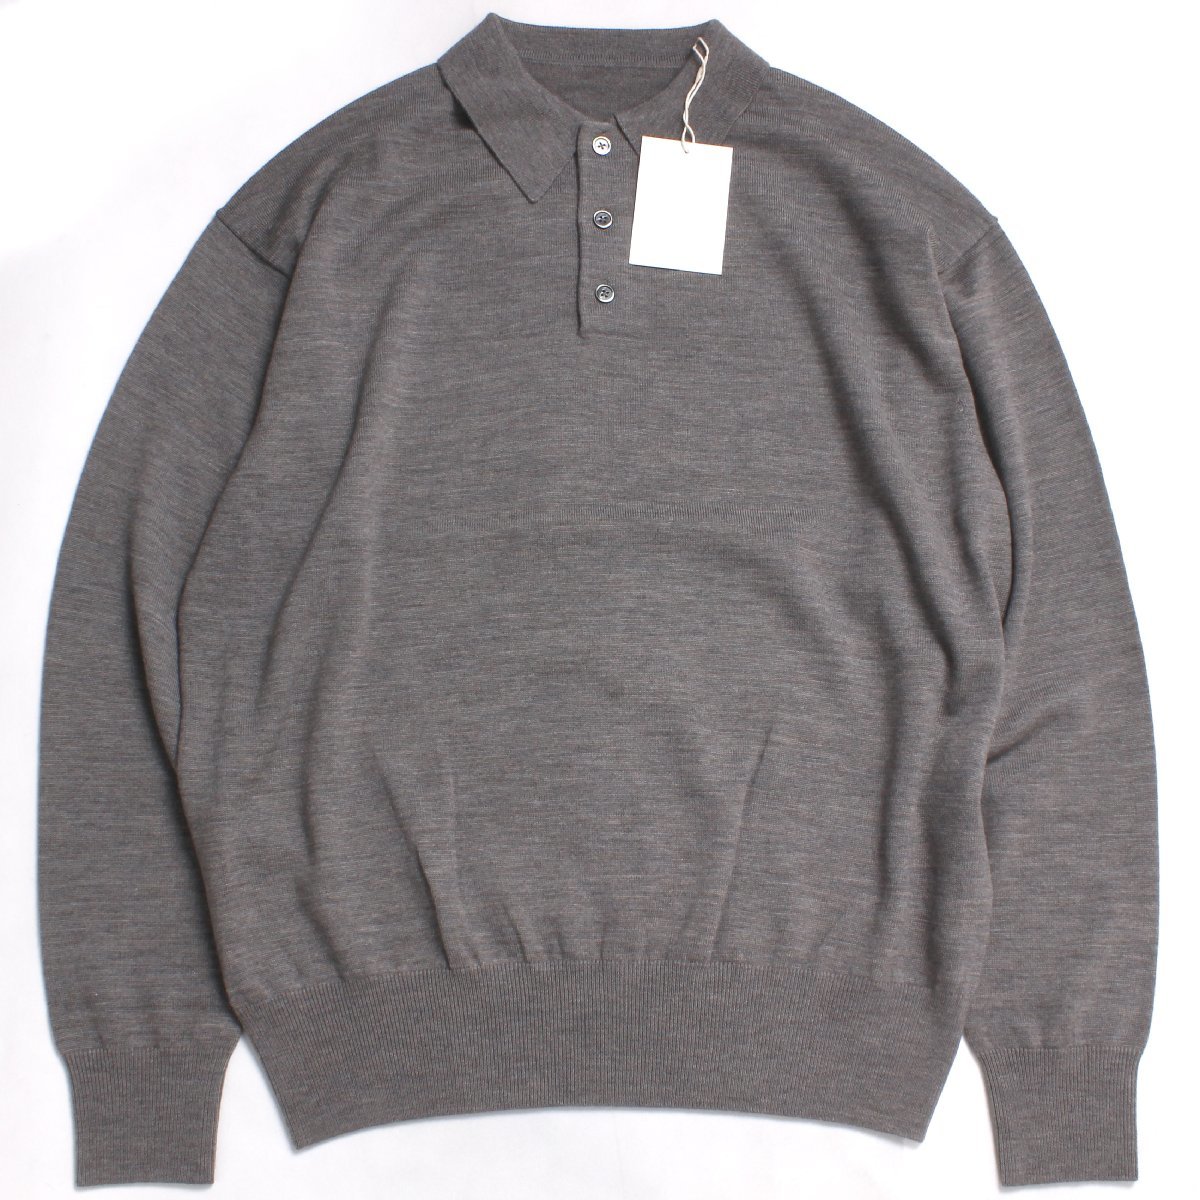 23AW【タグ付き・新品・定価22,000円】crepuscule Knit Polo L/S size1 GRAY 2303-035 クレプスキュール ニットポロ